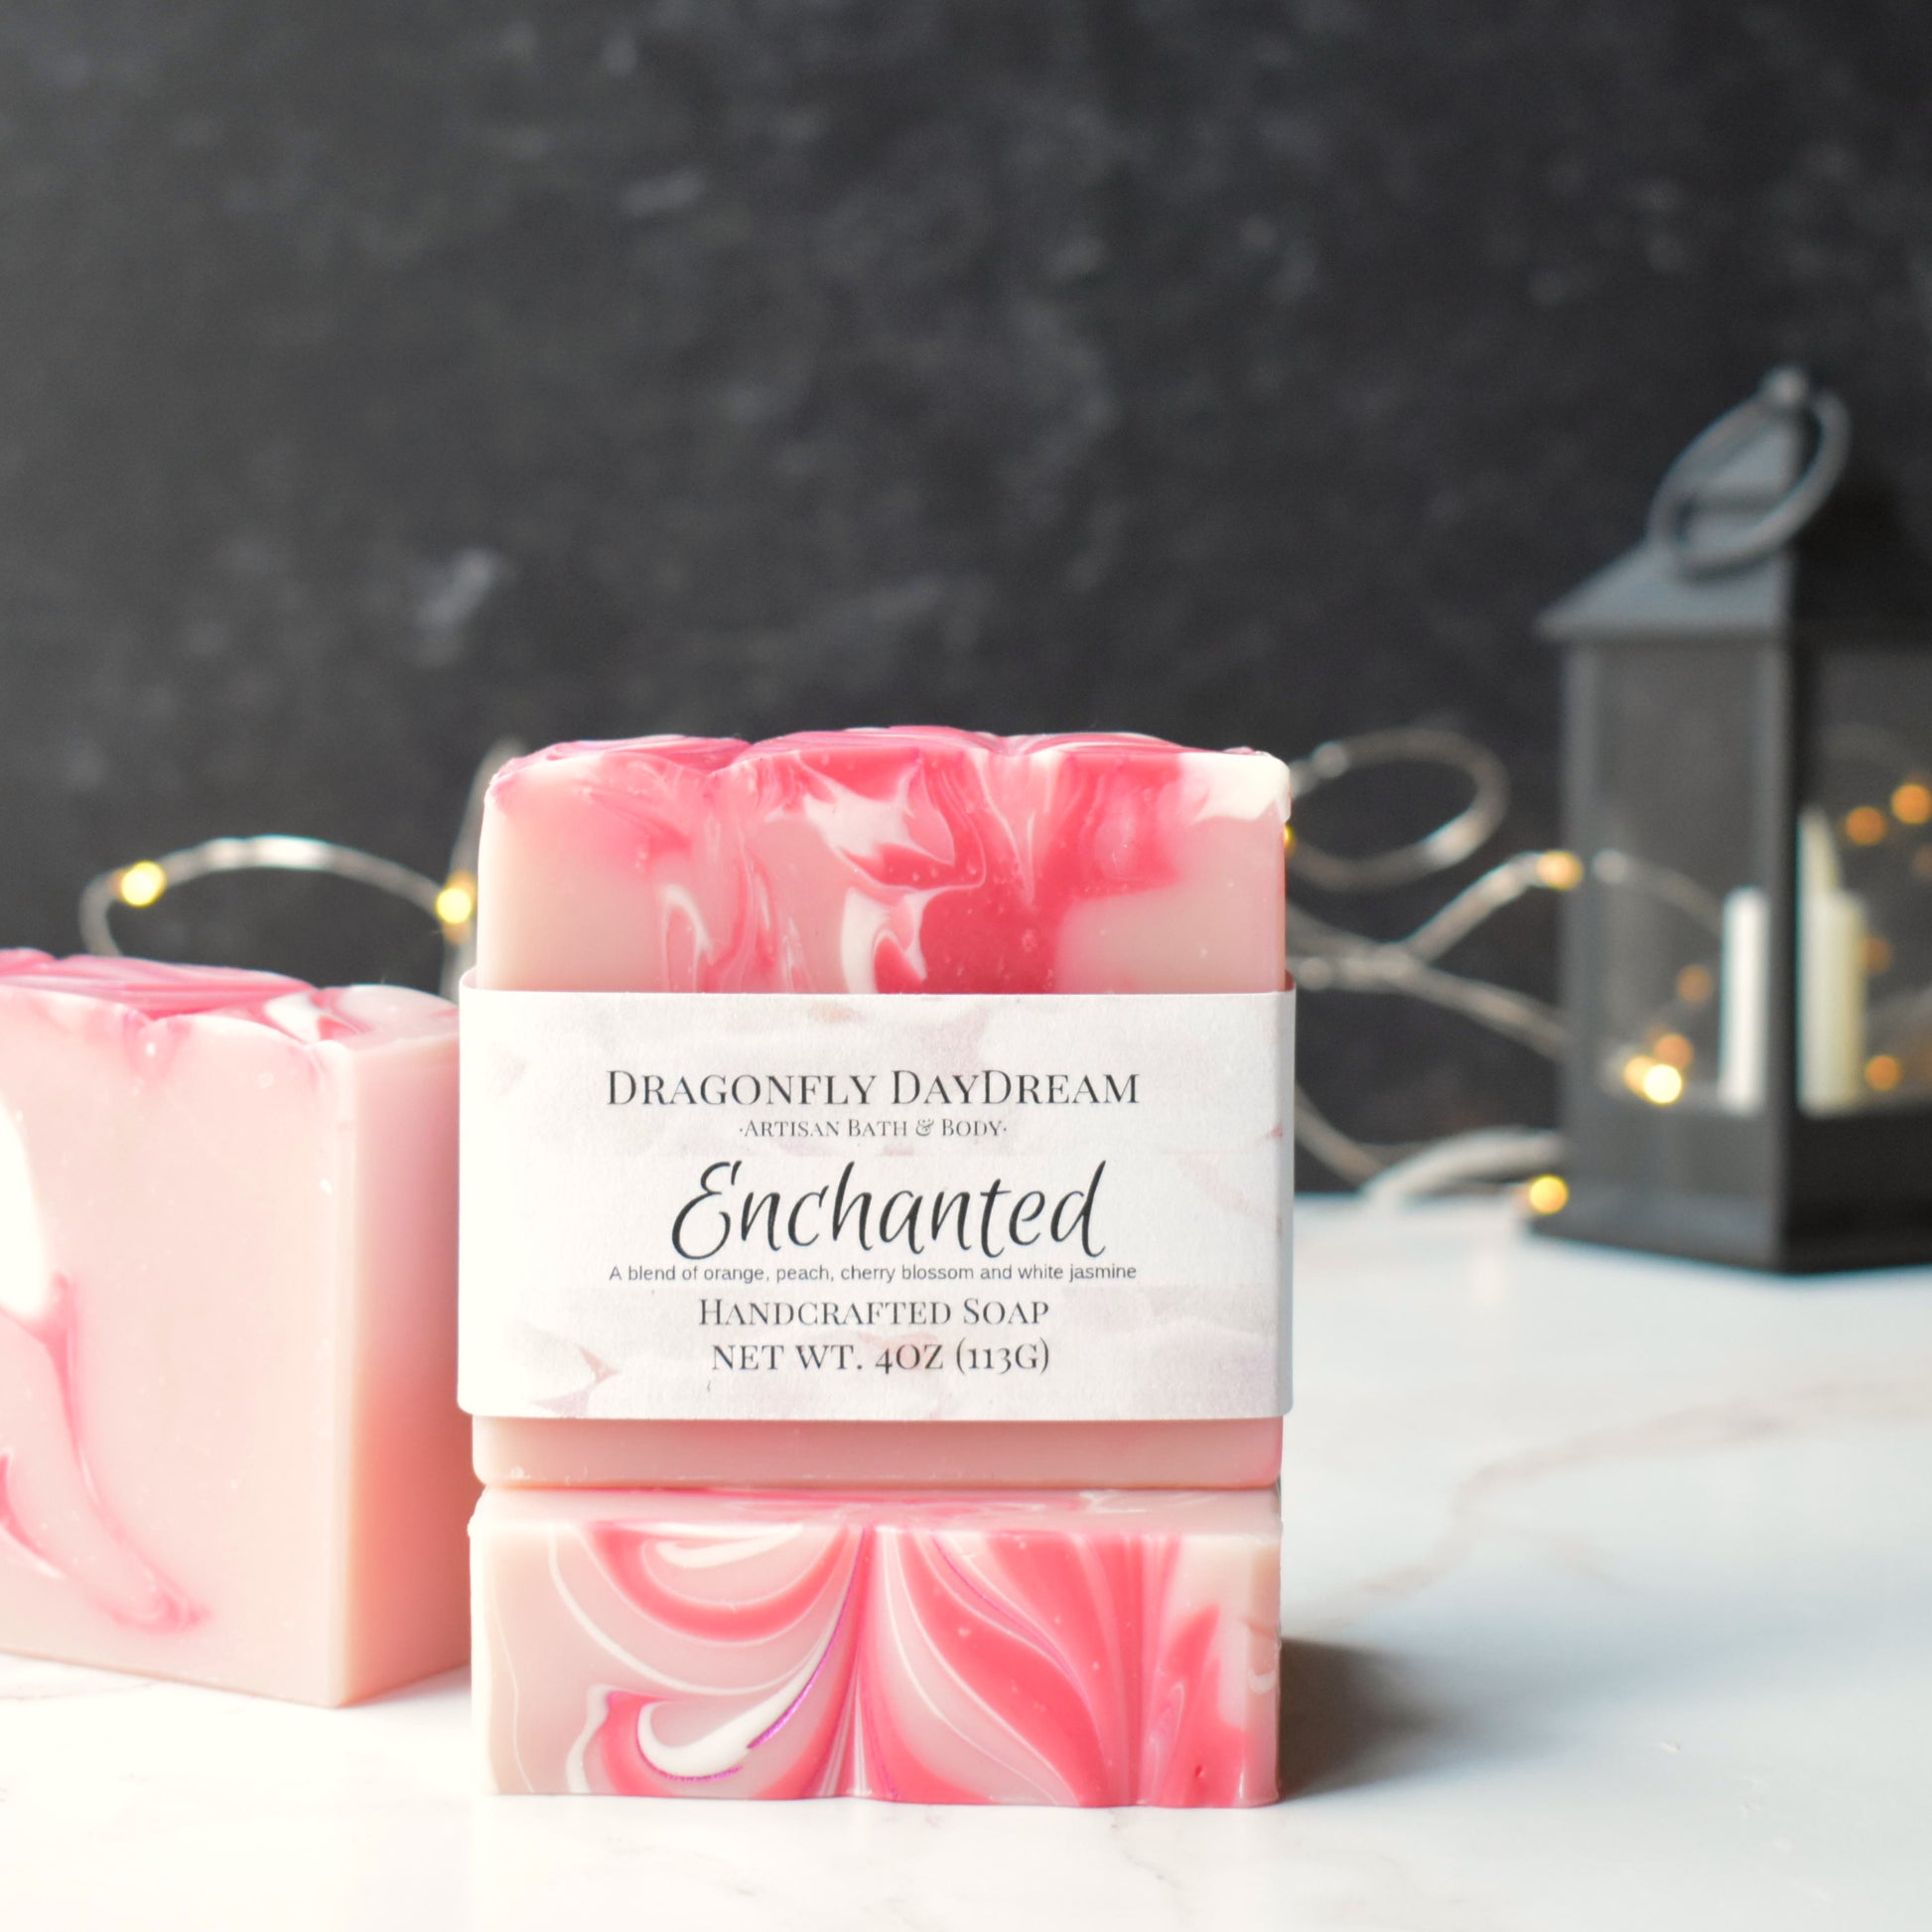 Pink, white and dark pink swirl soap on a marble counter with a dark charcoal background.  Rectangular soap in front is stacked on another and labeled “Dragonfly DayDream, Artisan Bath & Body, Enchanted, A blend of orange, peach, cherry blossom and white jasmine, Handcrafted Soap, Net Wt. 4oz (113g)”. Background is blurred with yellow fairy lights and black lantern